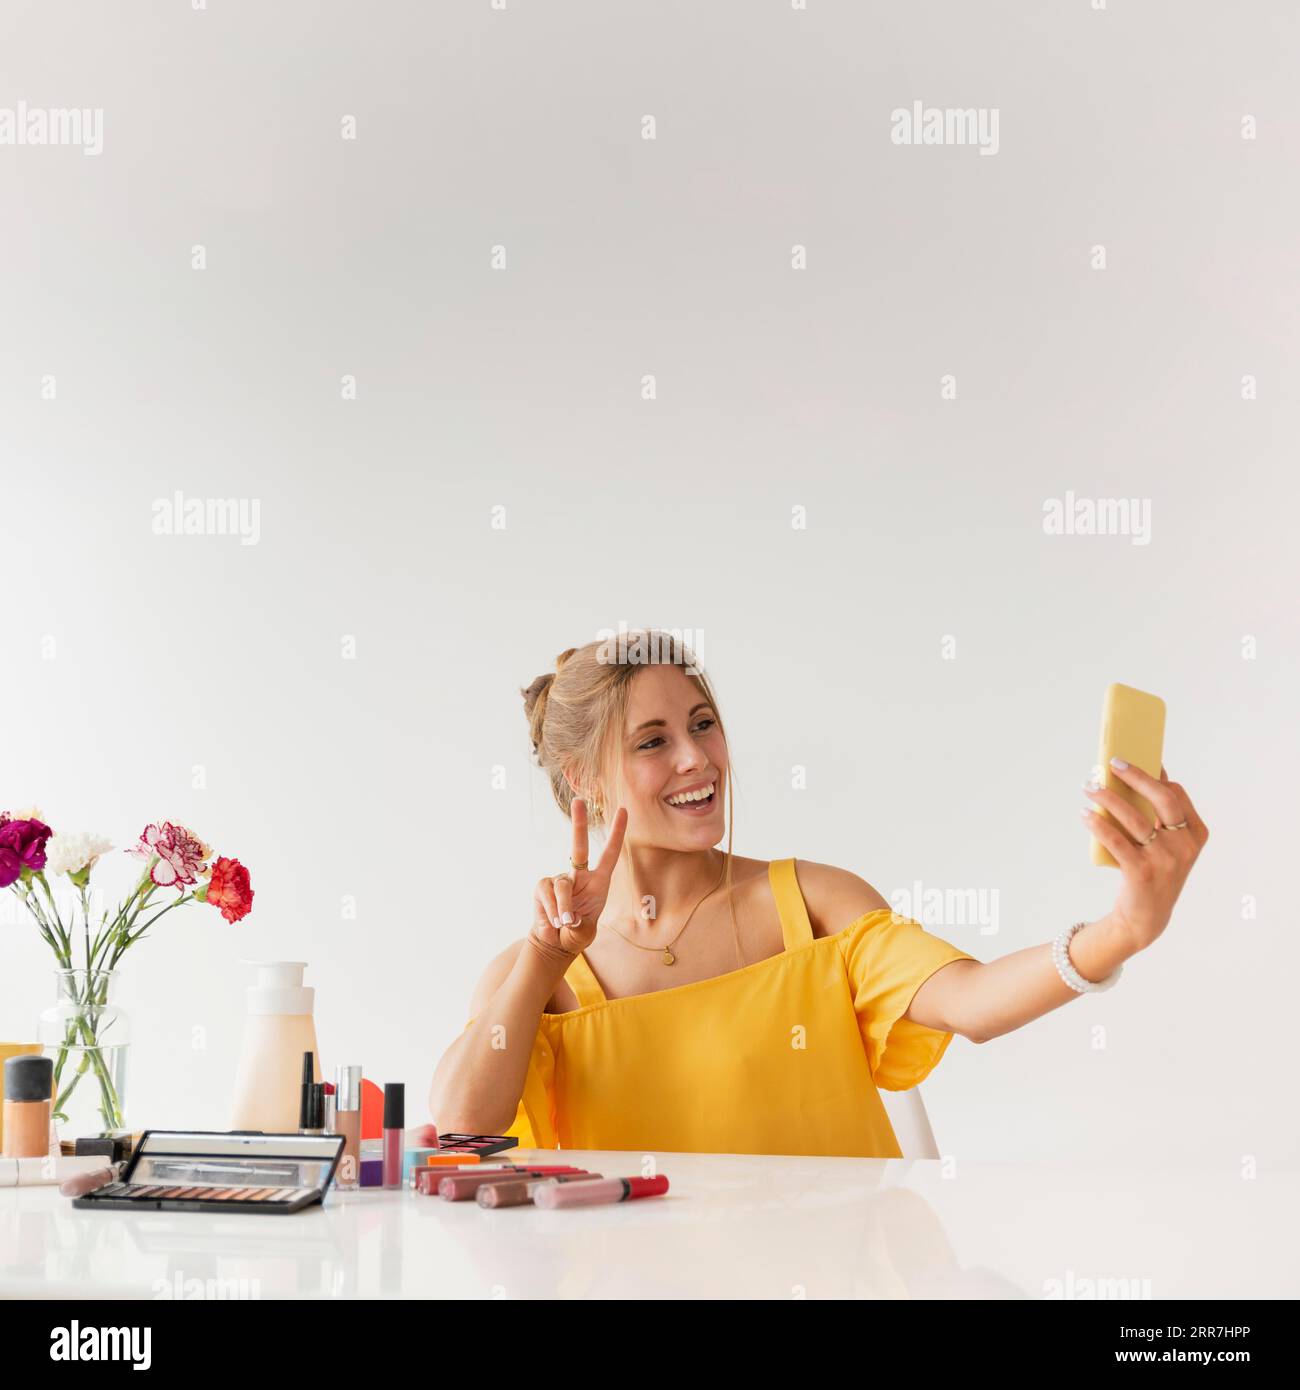 Woman taking selfie while showing sign peace Stock Photo